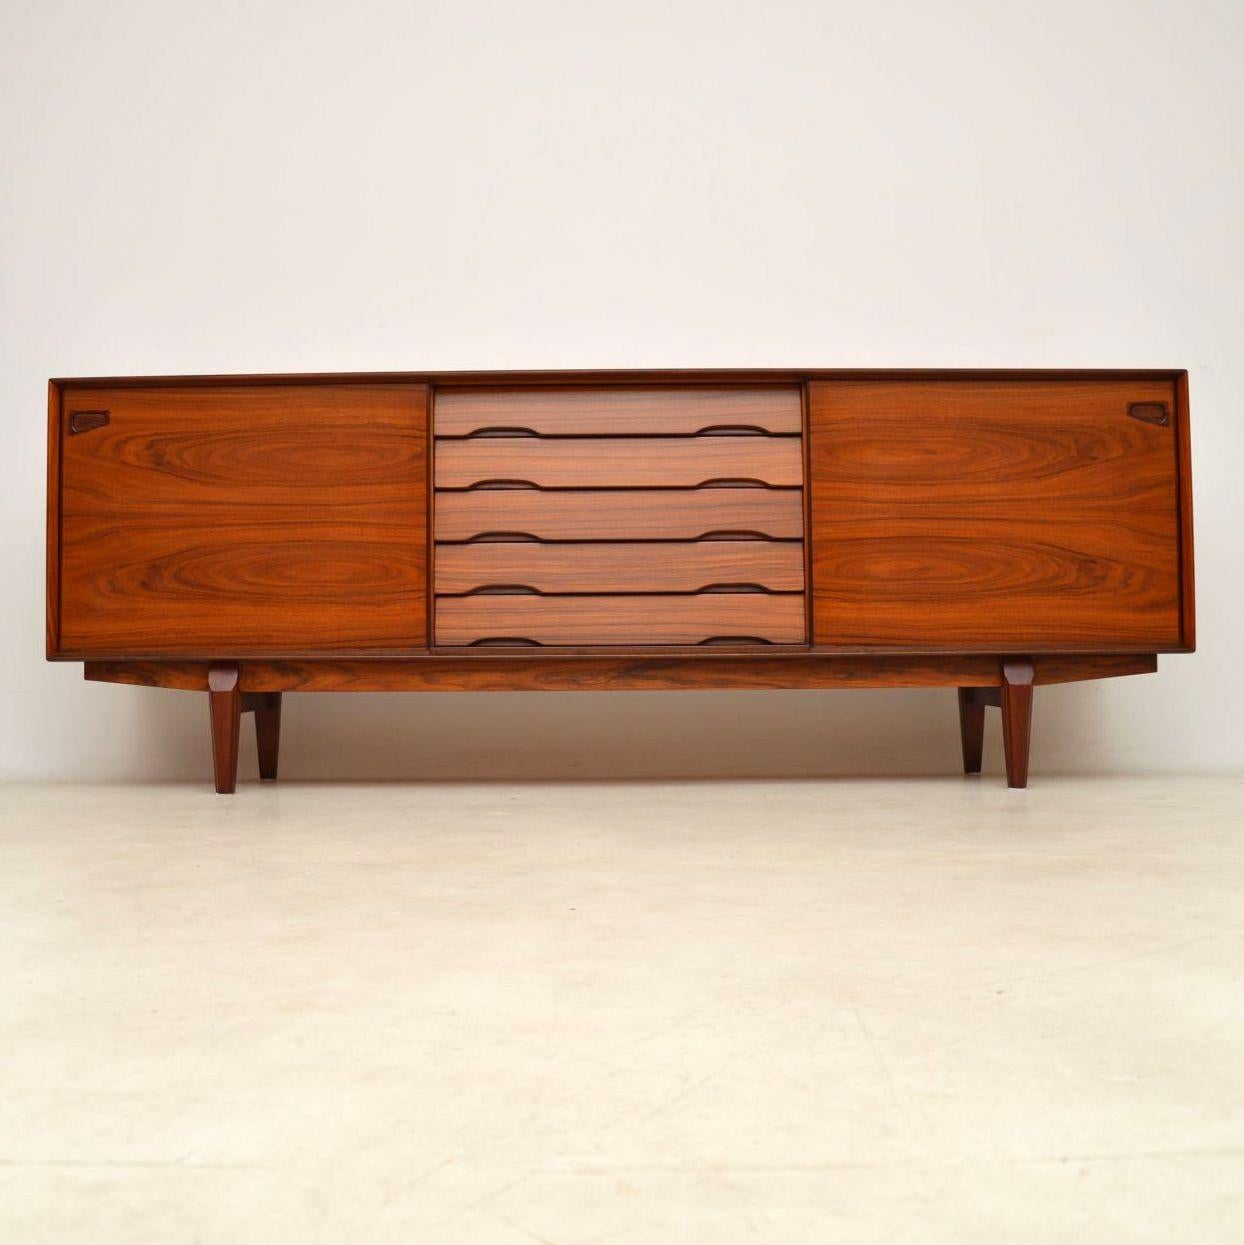 A magnificent vintage Danish sideboard, this dates from the 1960s-1970s and was made by Skovby. It’s of amazing quality, with a stunning wood construction throughout. The grain patterns and colour are simply beautiful, this looks amazing from all